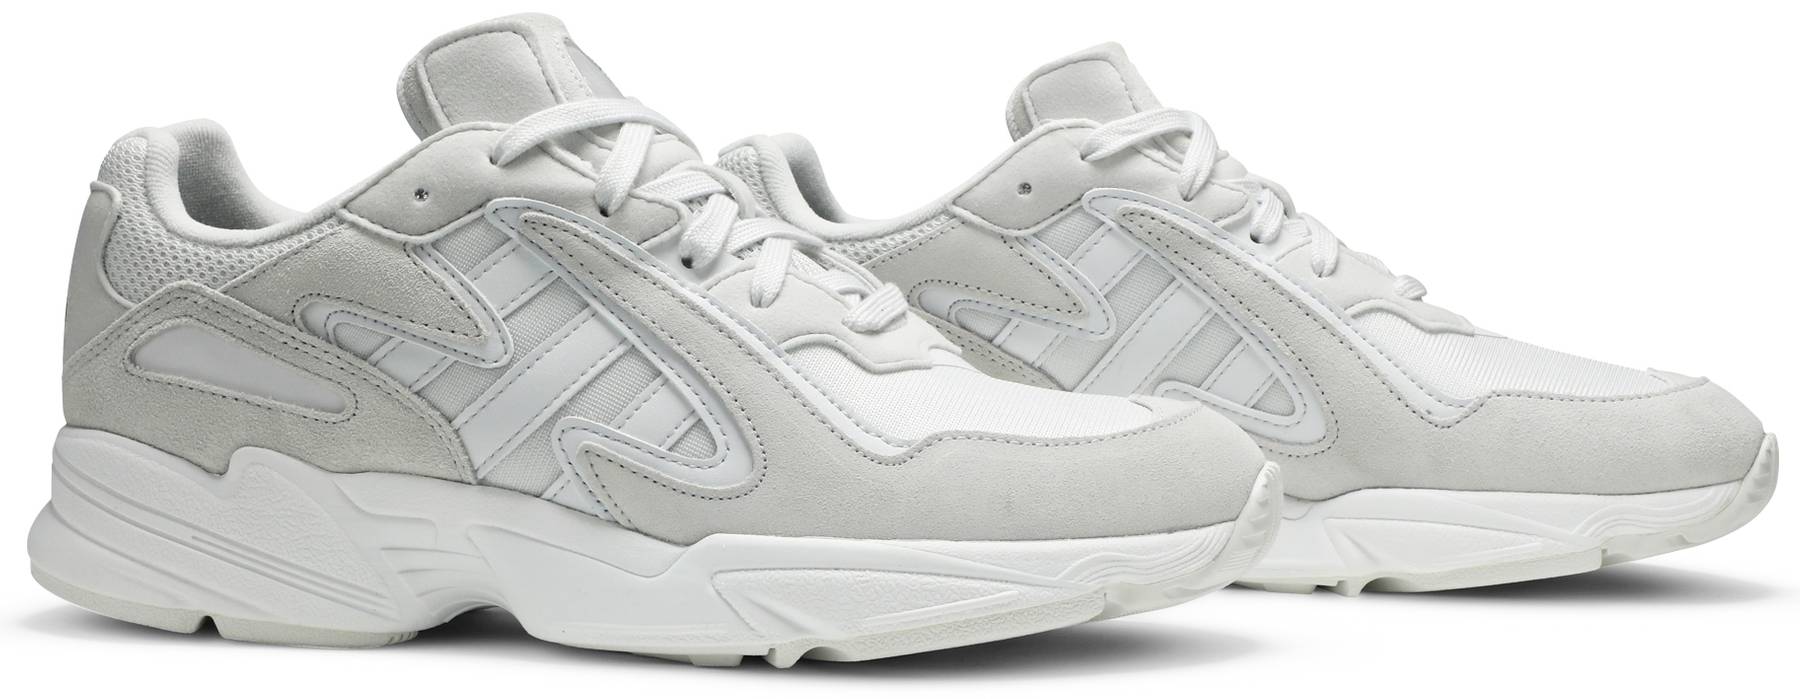 Yung-96 Chasm 'Crystal White' - adidas - EE7238 | GOAT